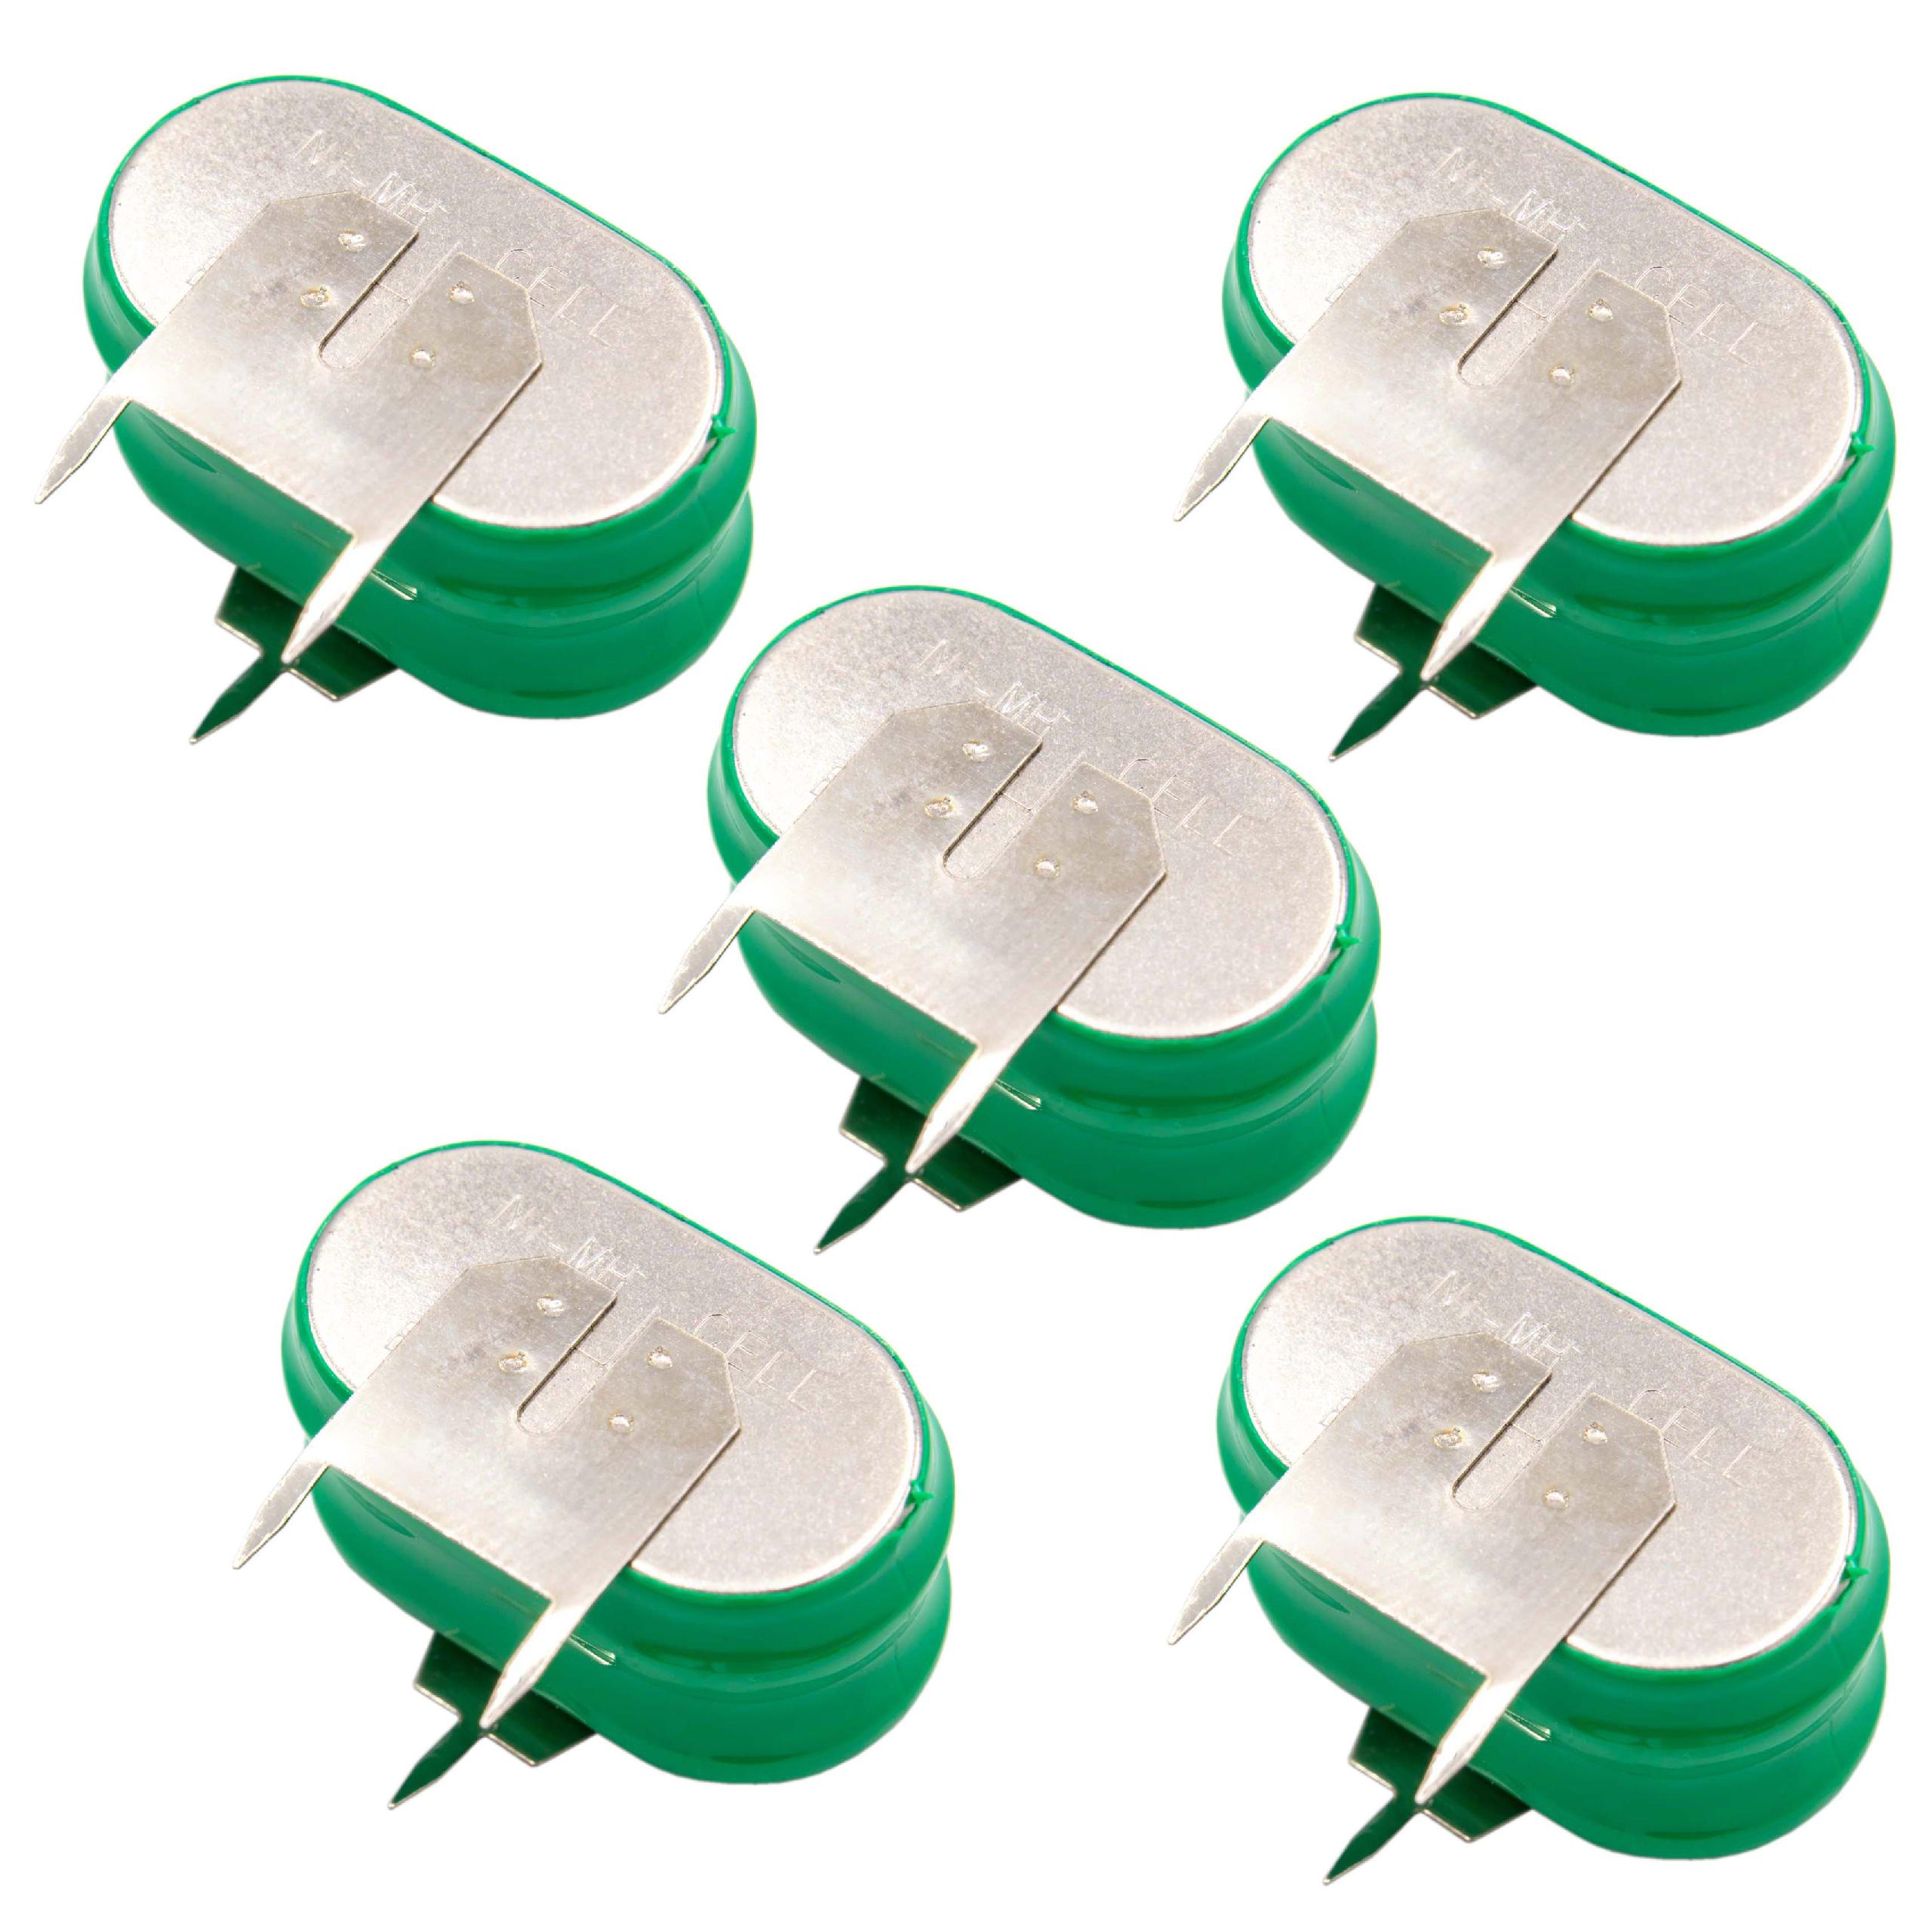 5x Button Cell Battery (2x Cell) Type 2/V150H 3 Pins for Model Building Solar Lamps etc. - 150mAh 2.4V NiMH